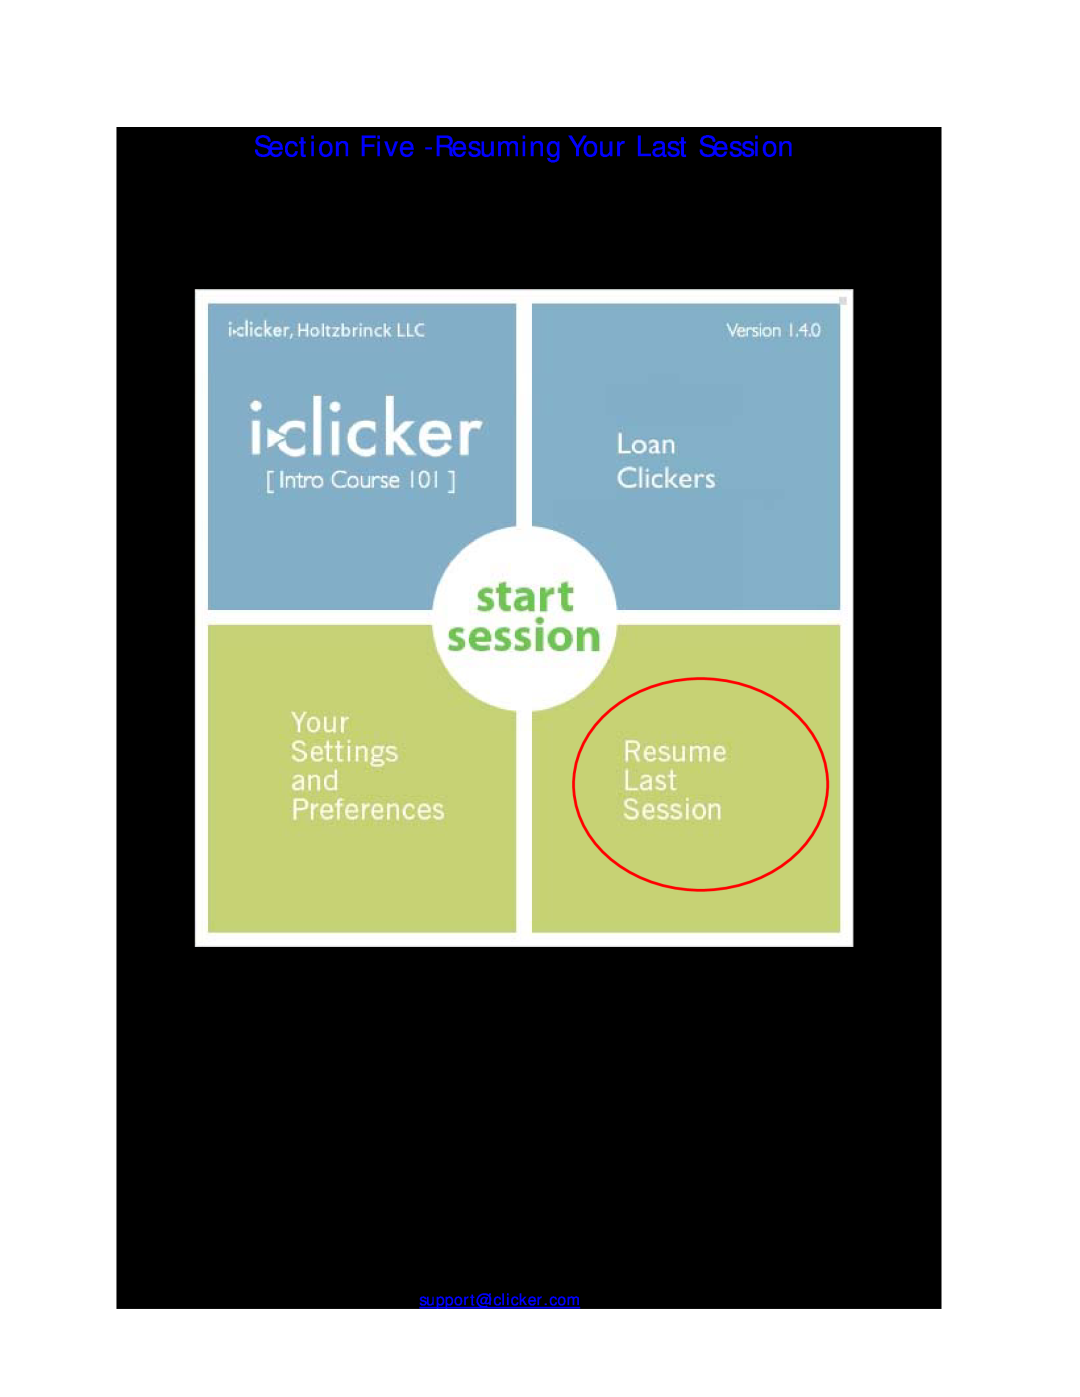 Apple Mouse Section Five -Resuming Your Last Session, Questions? Contact us at support@iclicker.com or call toll-free at 